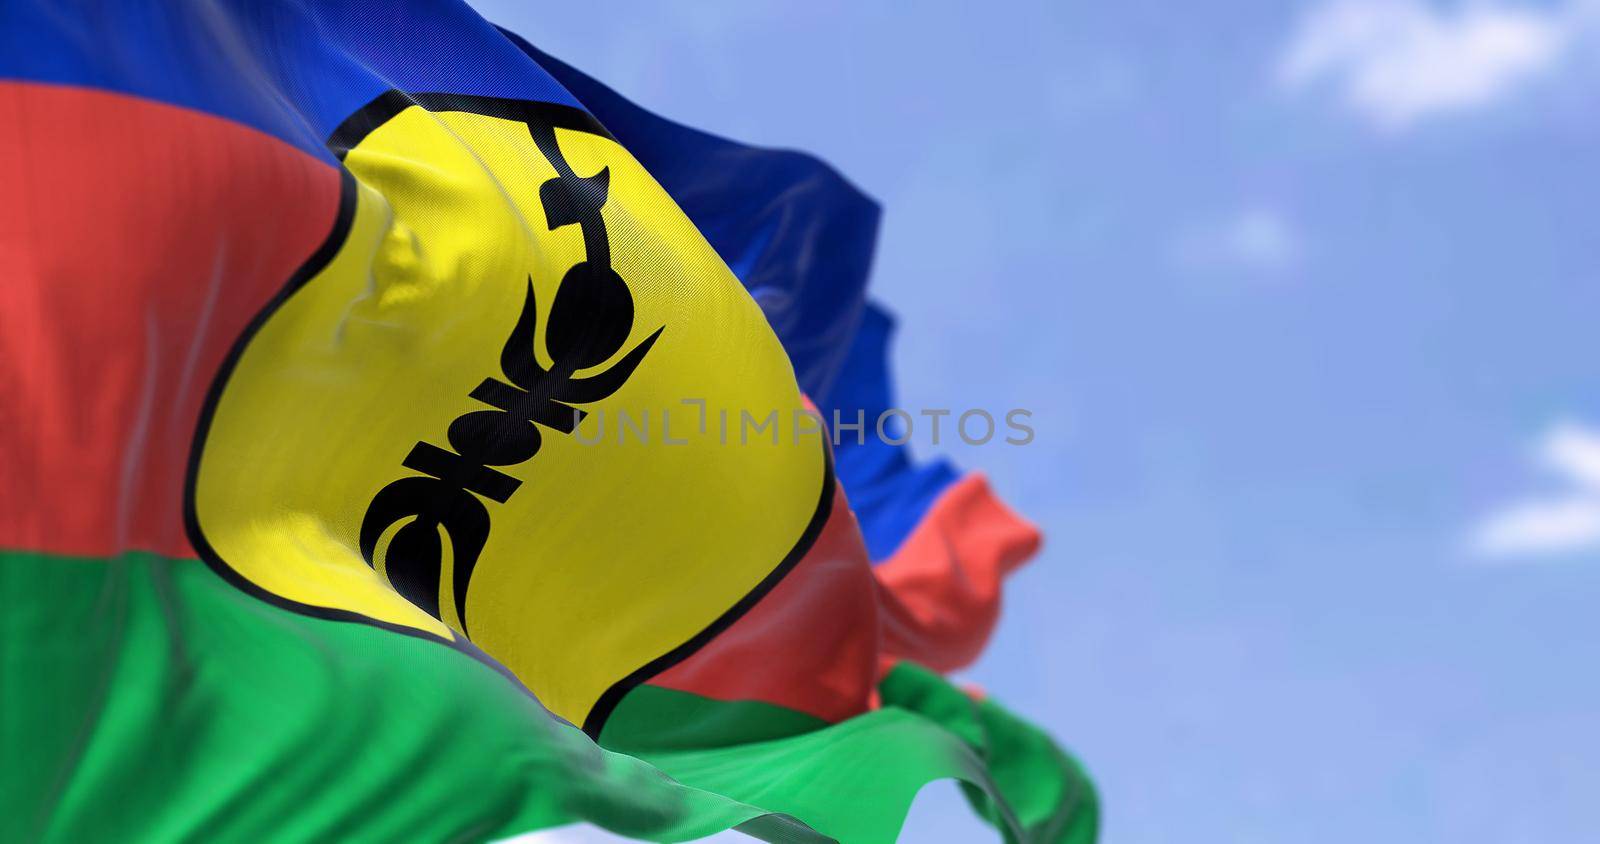 The flag of New Caledonia waving in the wind on a clear day by rarrarorro